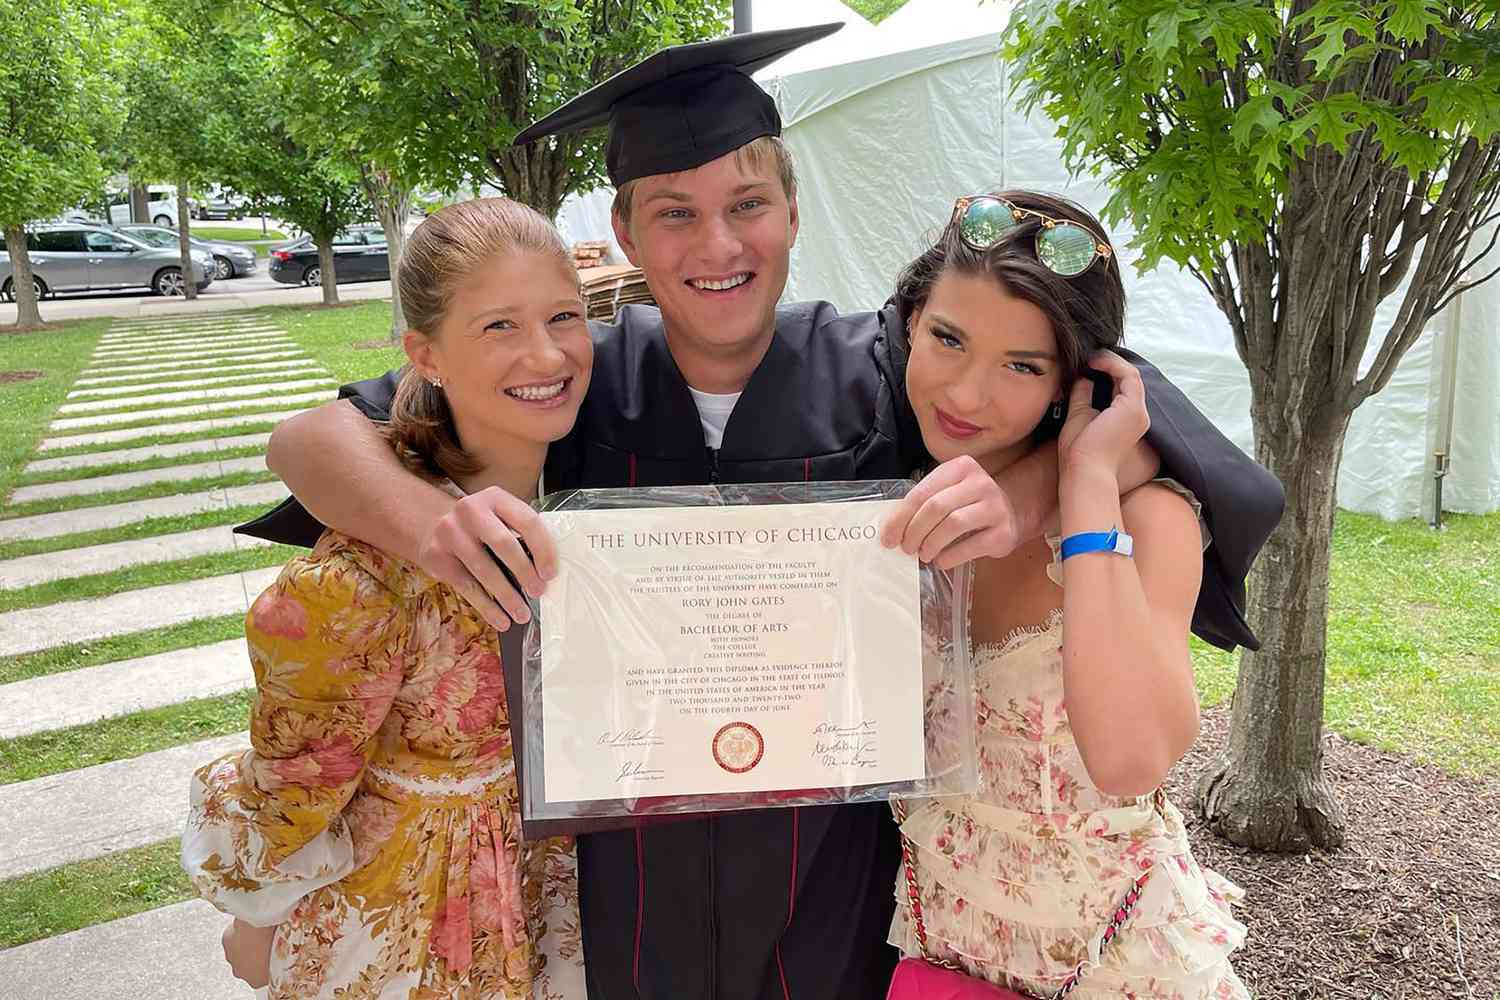 Rory John Gates wearing a graduation cap and gown with his two sisters